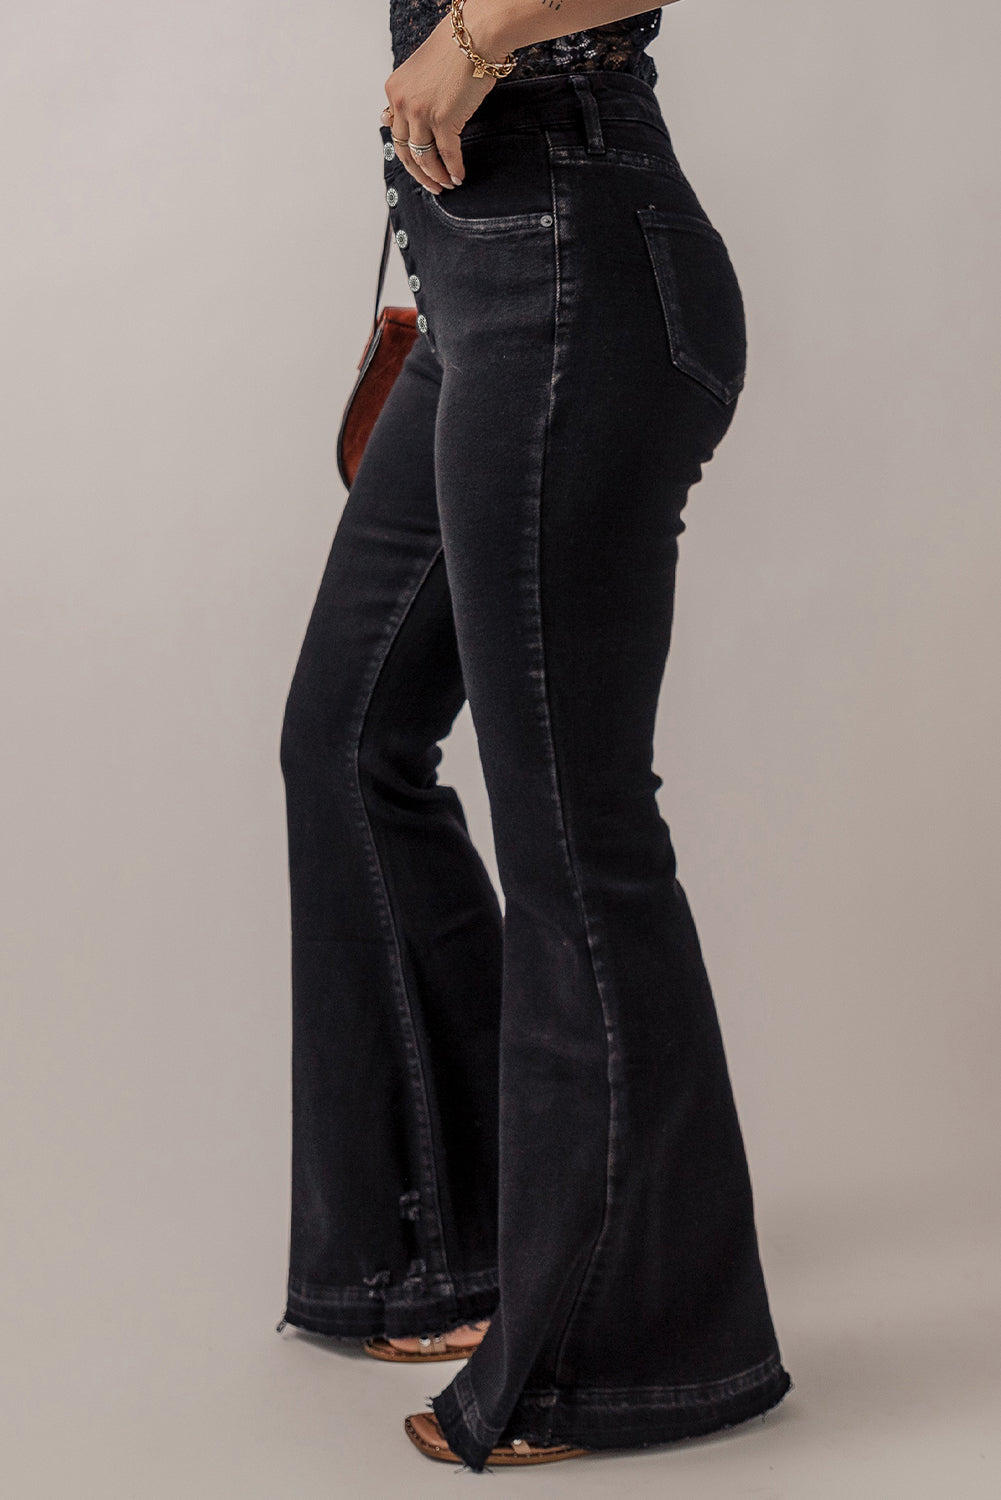 Black High Waist Button Front Flare Jeans